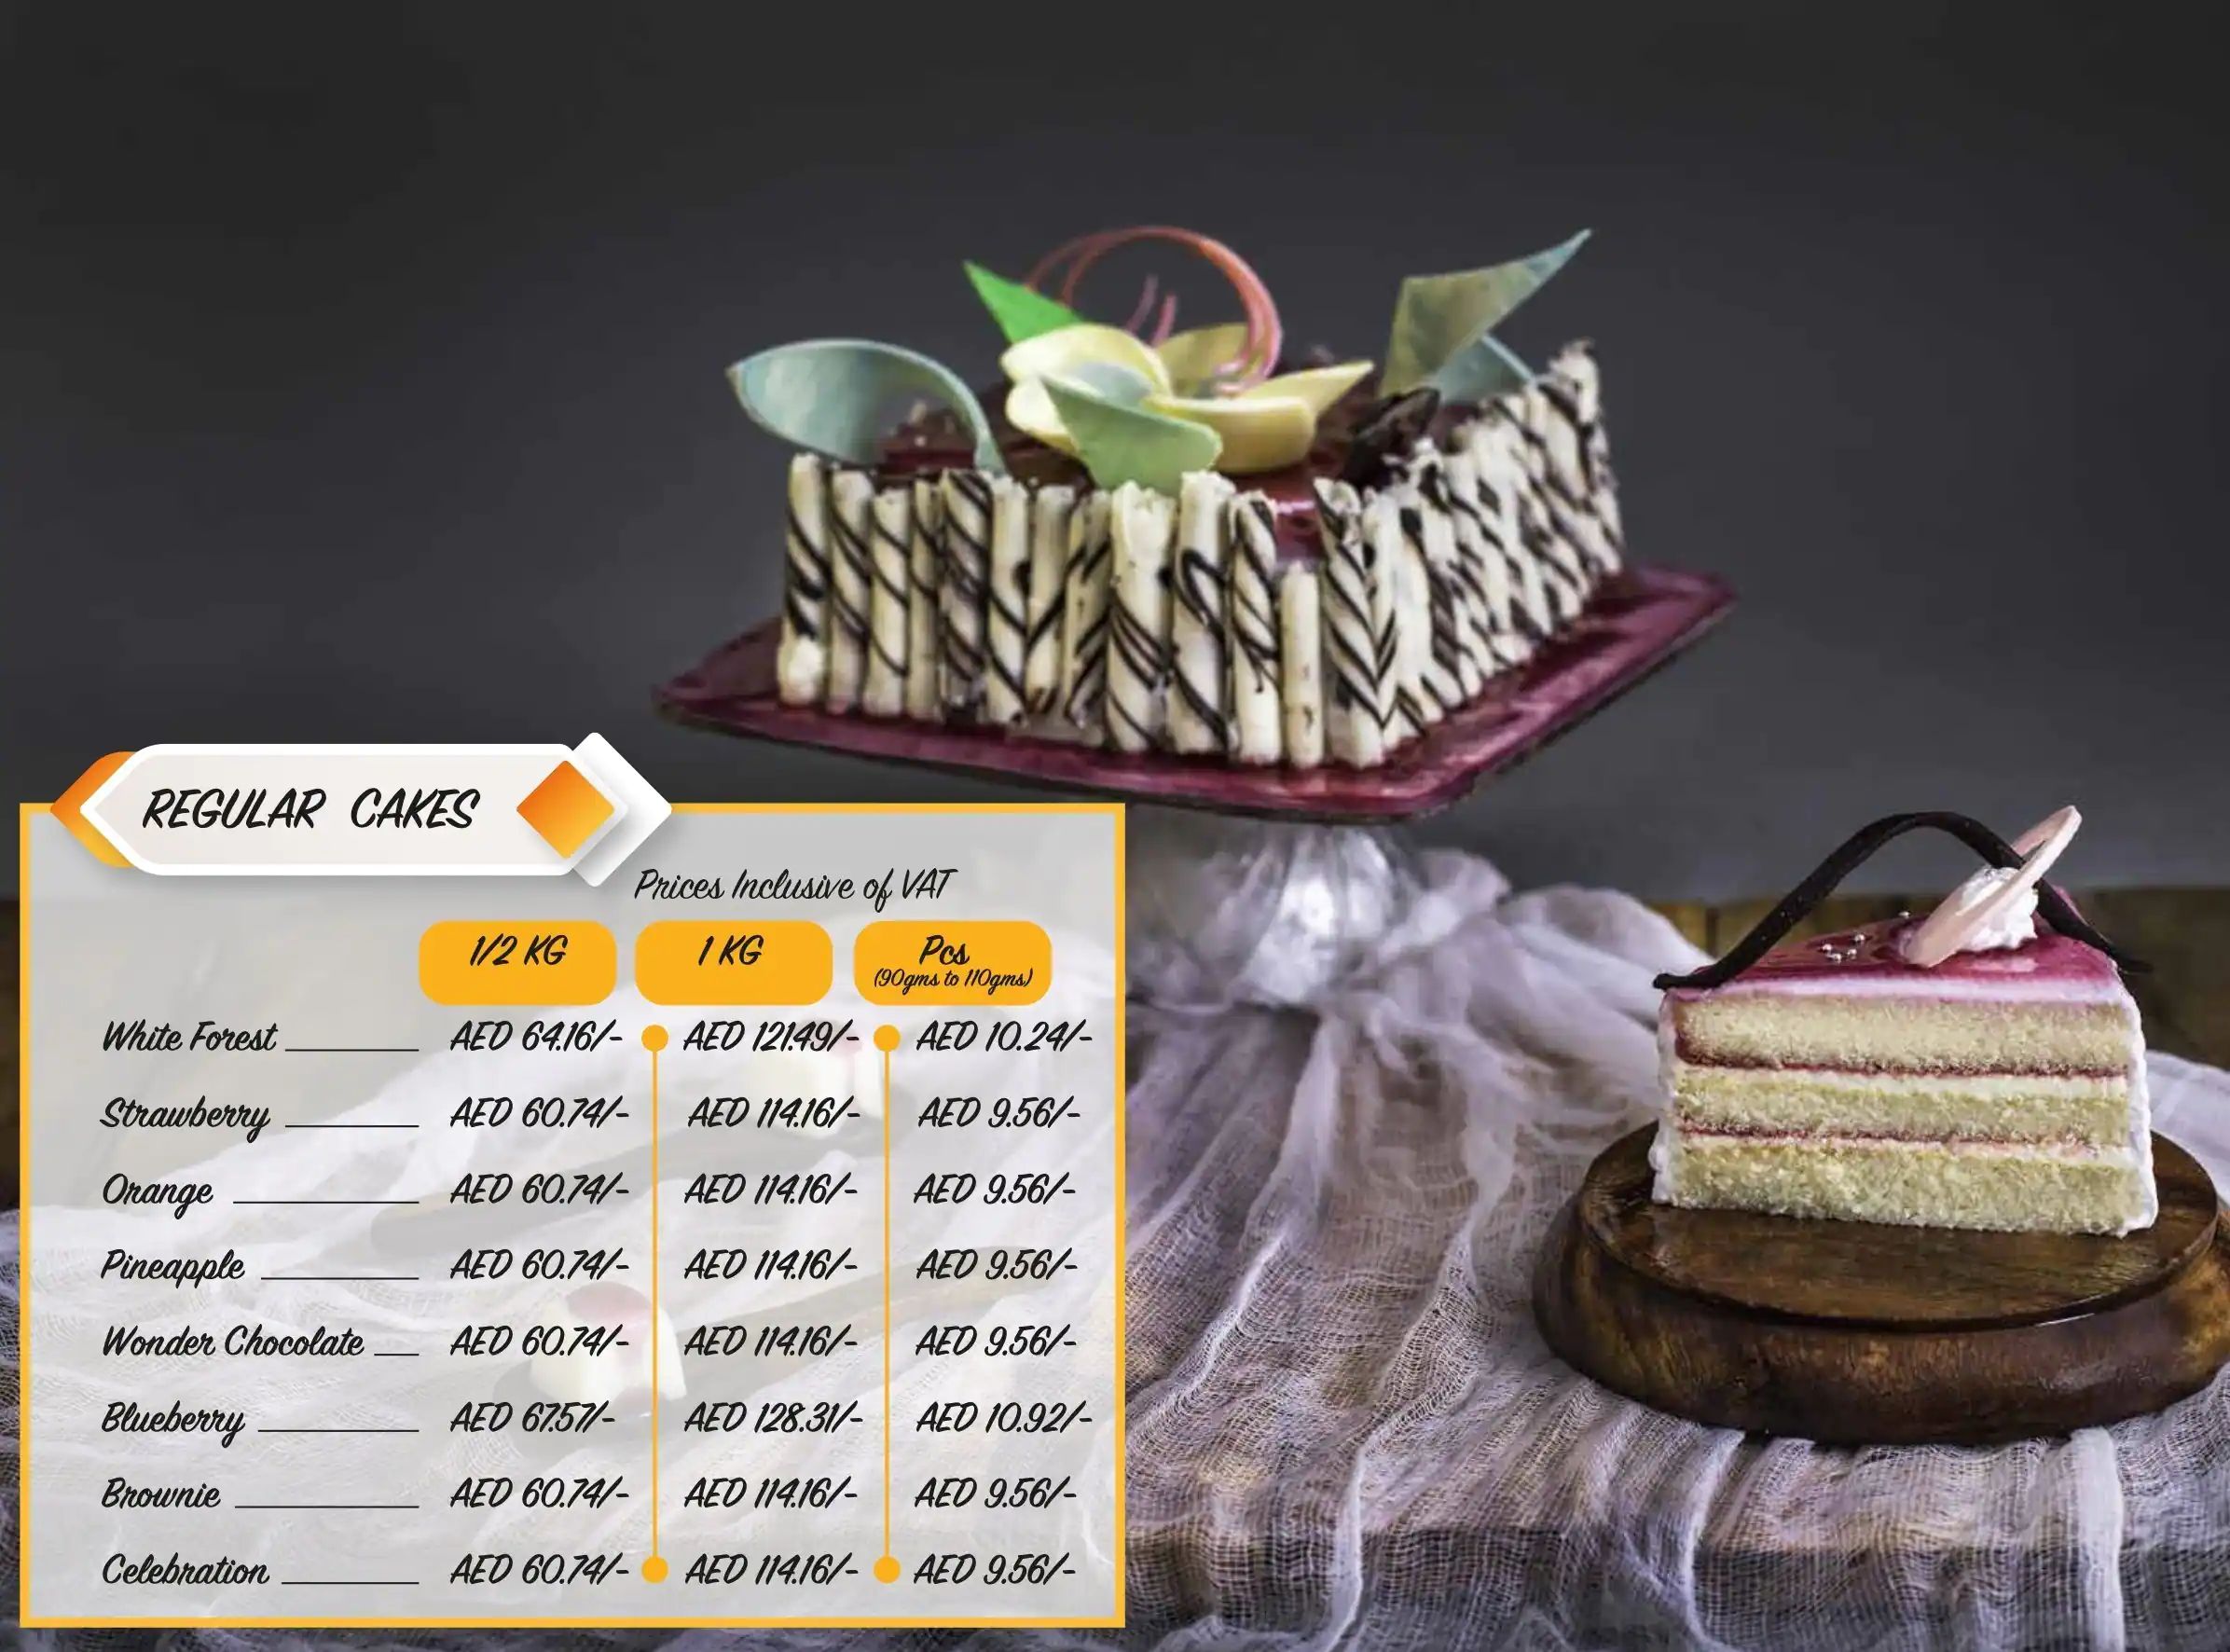 Amma's Pastries Electronic City - Cake Shop in Electronic City